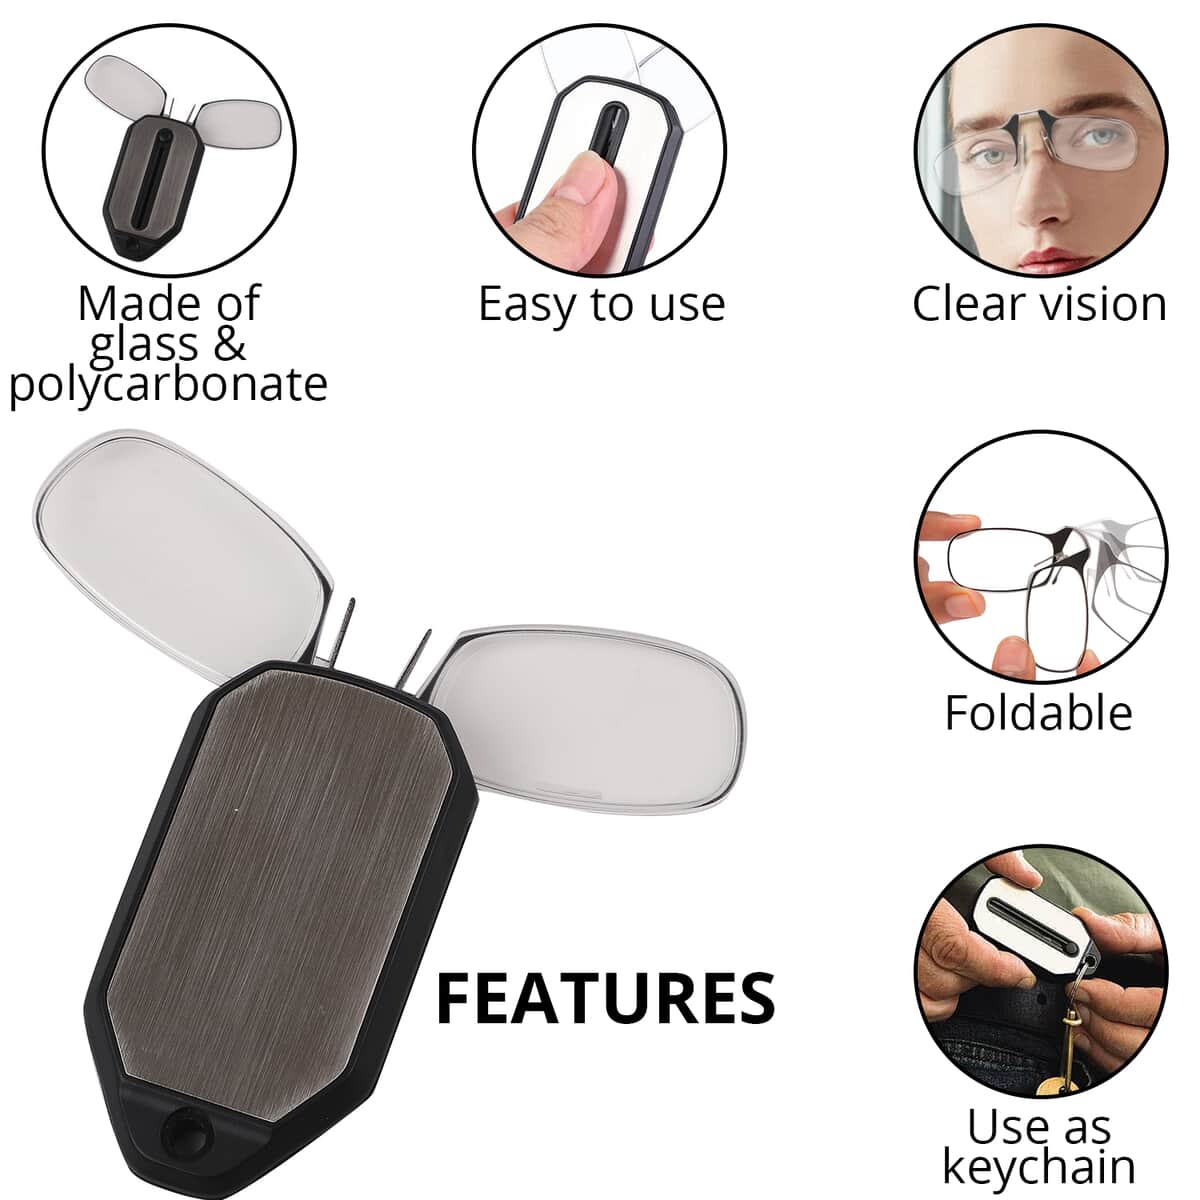 Black 175 Degree Foldable Reading Glasses with Case image number 2